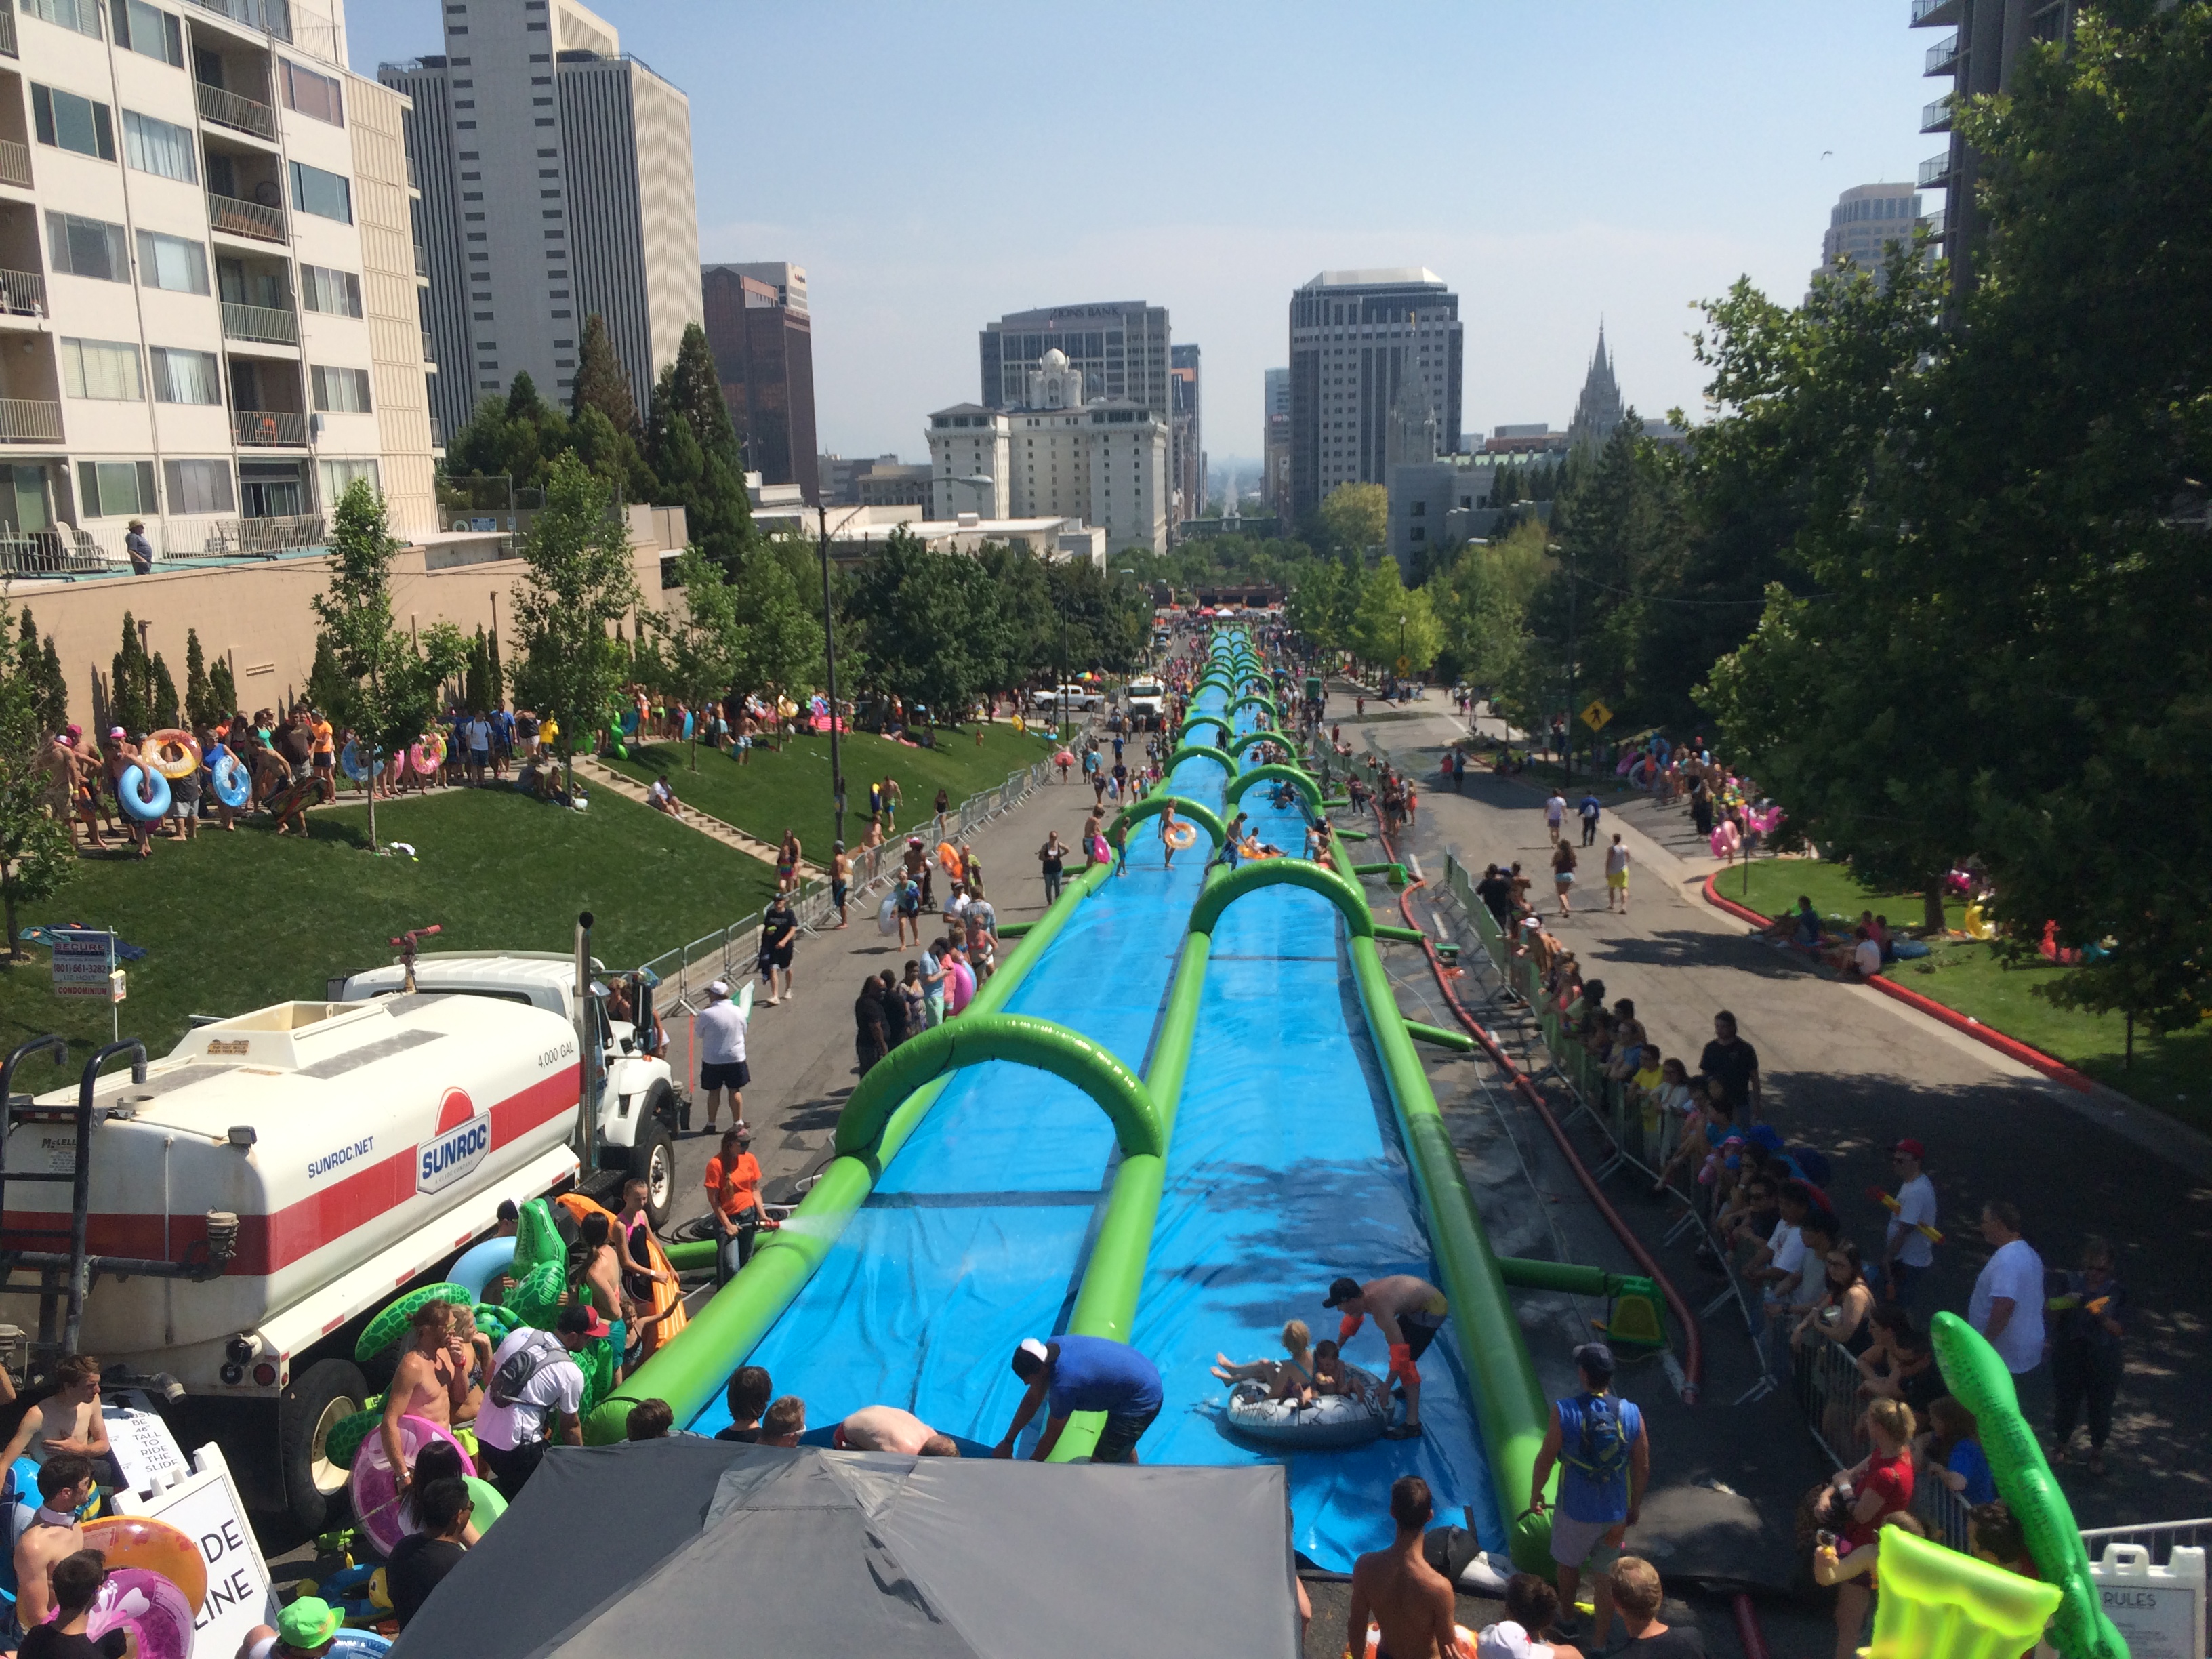 Slide The City is Coming to Philly With a Giant Water Slide! See How to